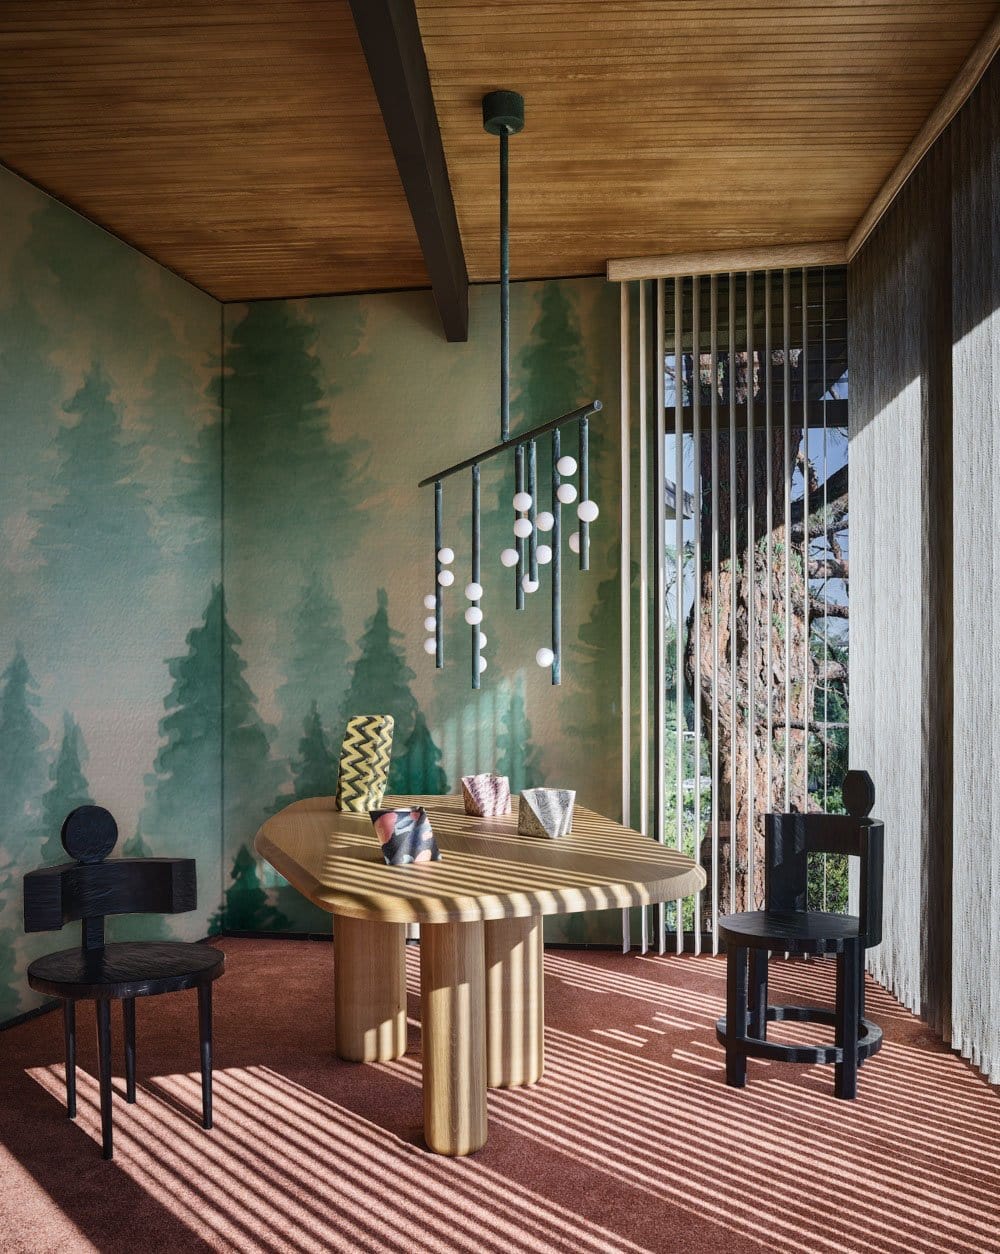 watercolor green forest wallpaper mural for dining room decor